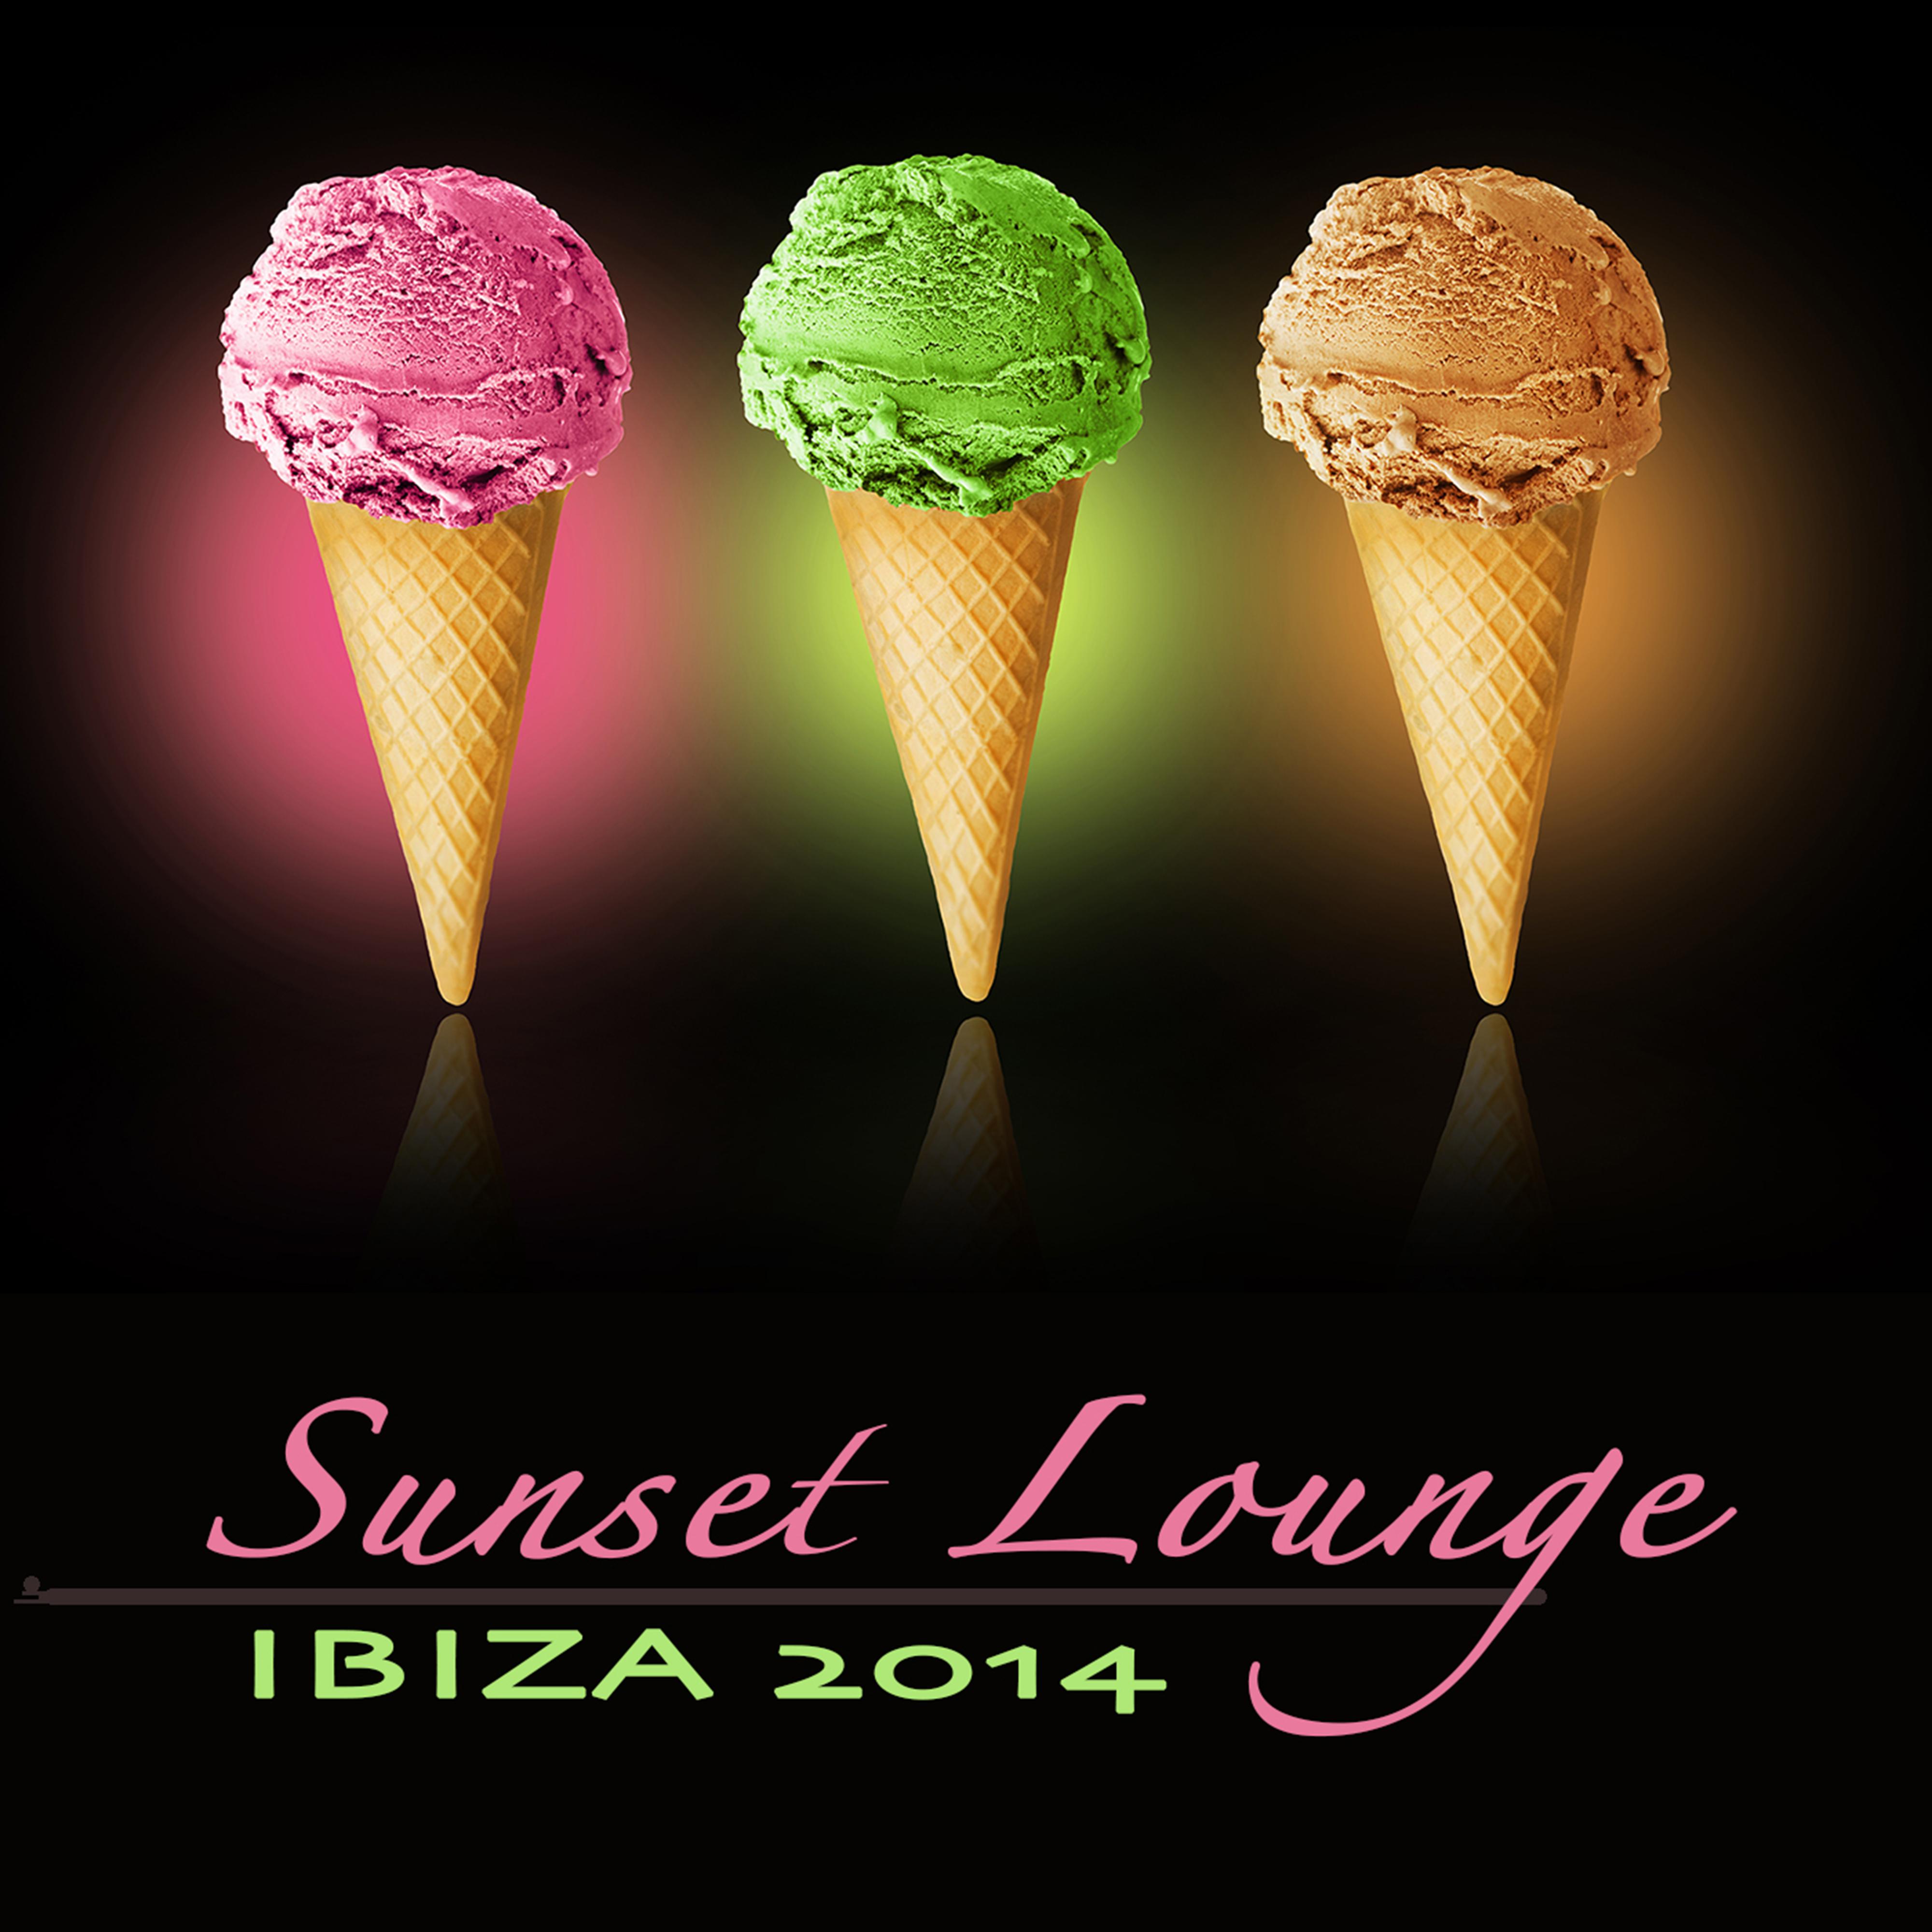 Sunset Lounge Ibiza 2014 - Lounge Relaxation **** Wonderful Chill Out Music for Summer Love